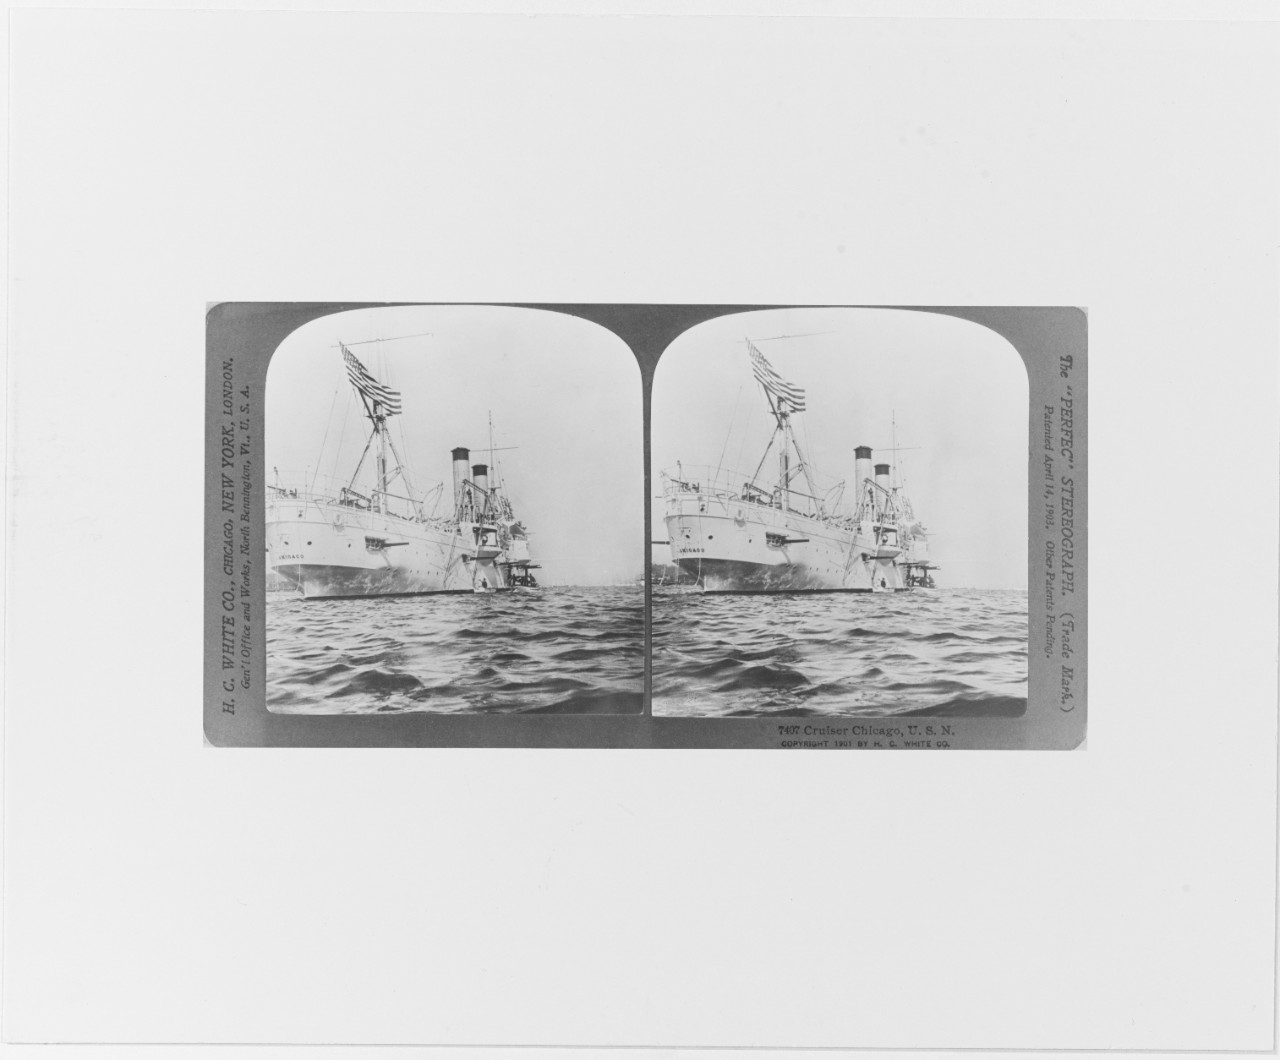 USS CHICAGO (1889-1935), stereocard